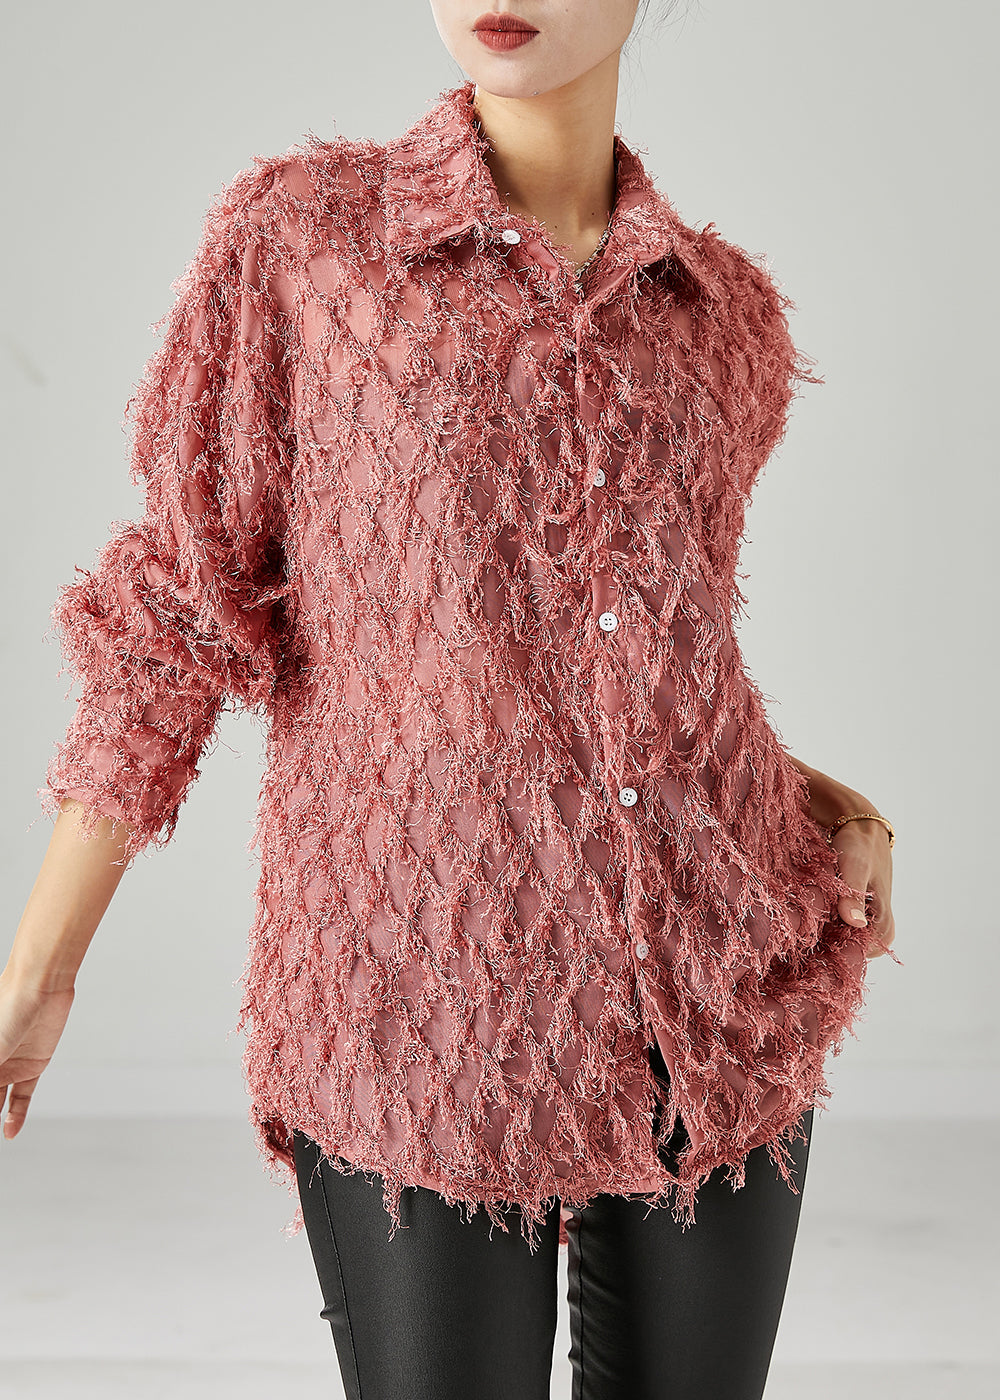 French Brick Red Tasseled Cotton Top Spring